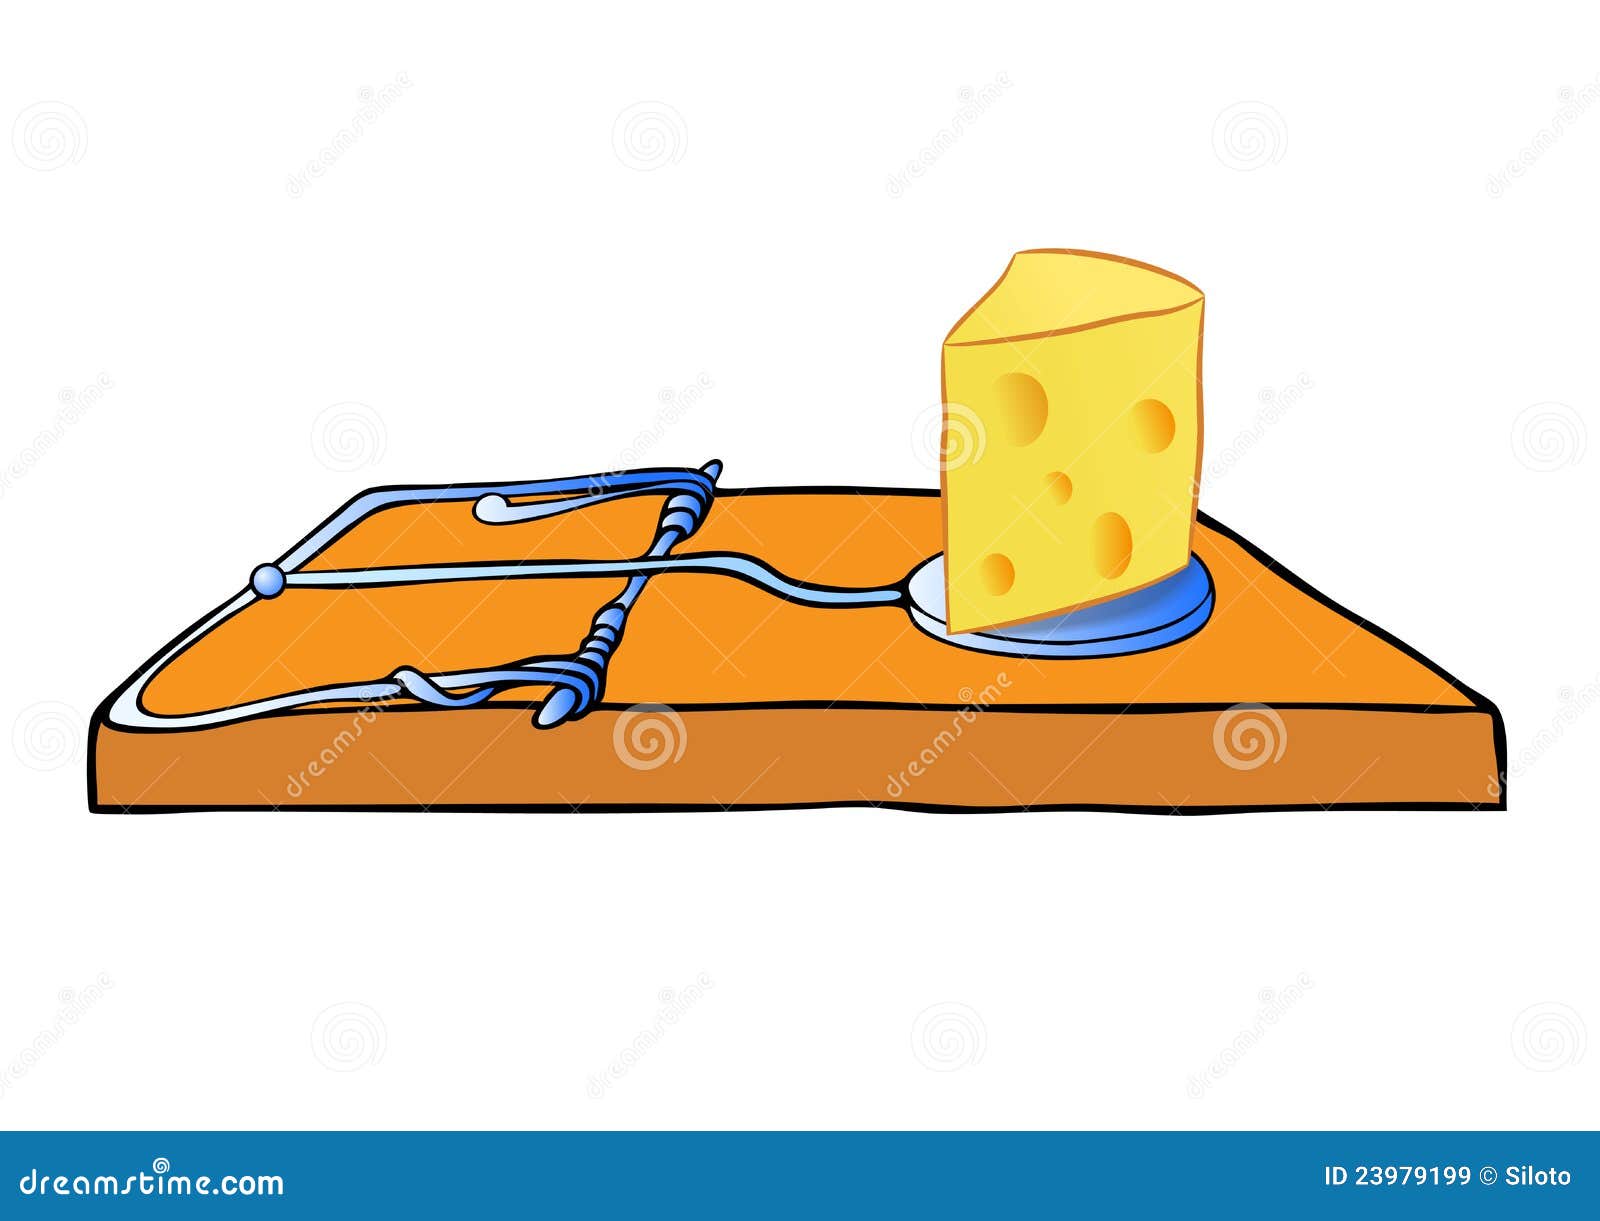 Mousetrap With Cheese - Trap Royalty Free Stock Images - Image: 23979199